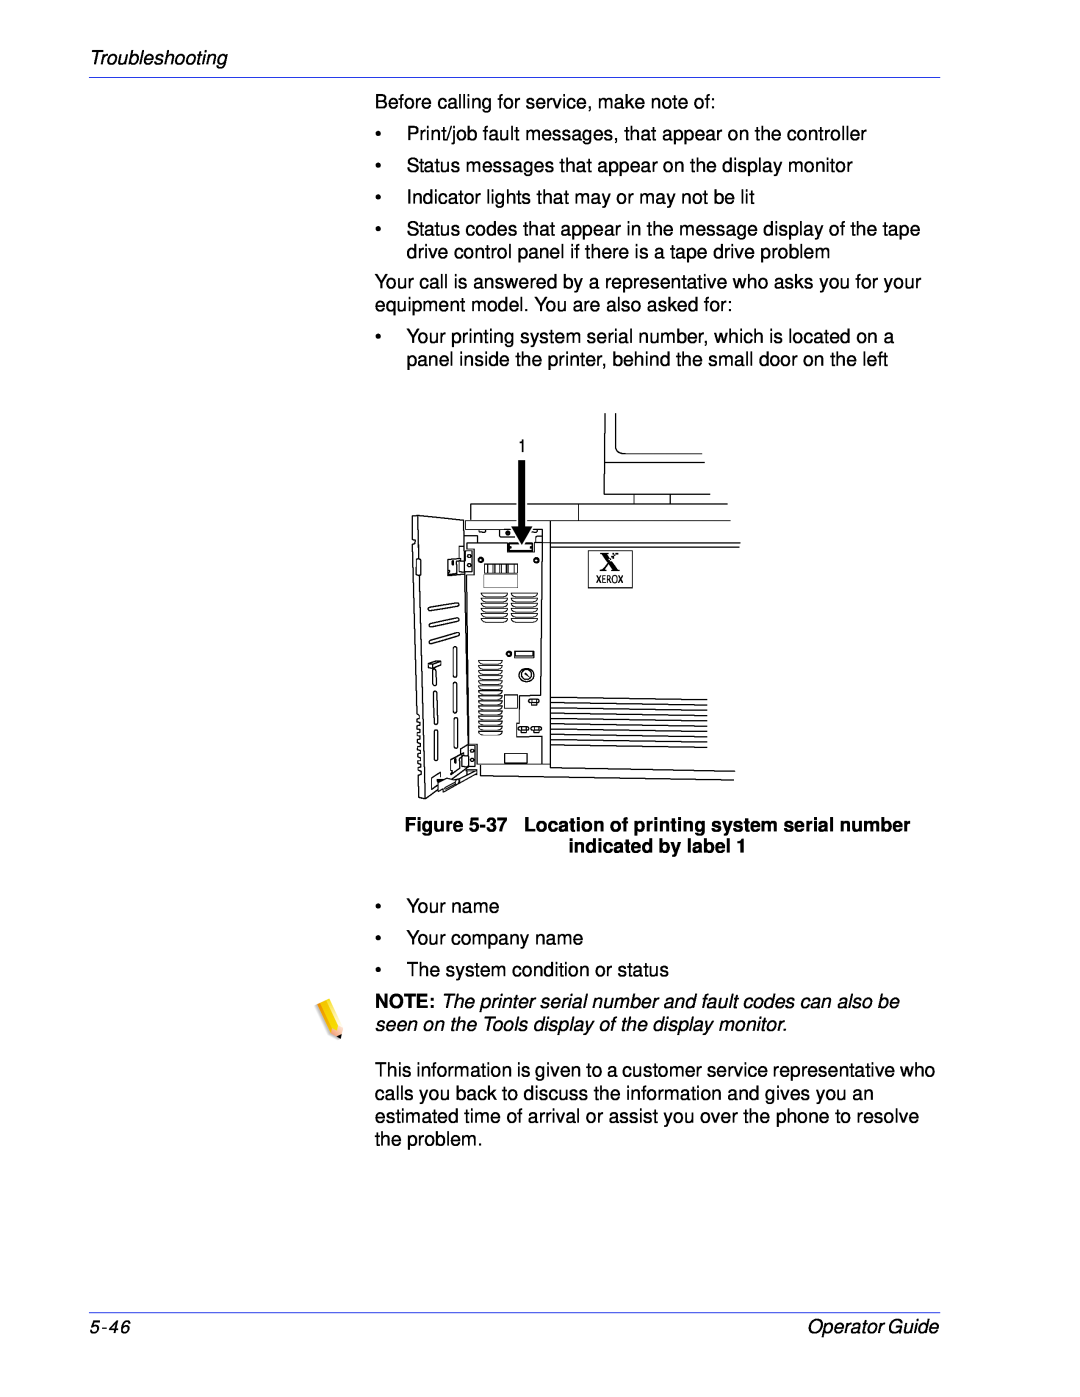 Xerox 100, 180 EPS manual Troubleshooting, indicated by label 